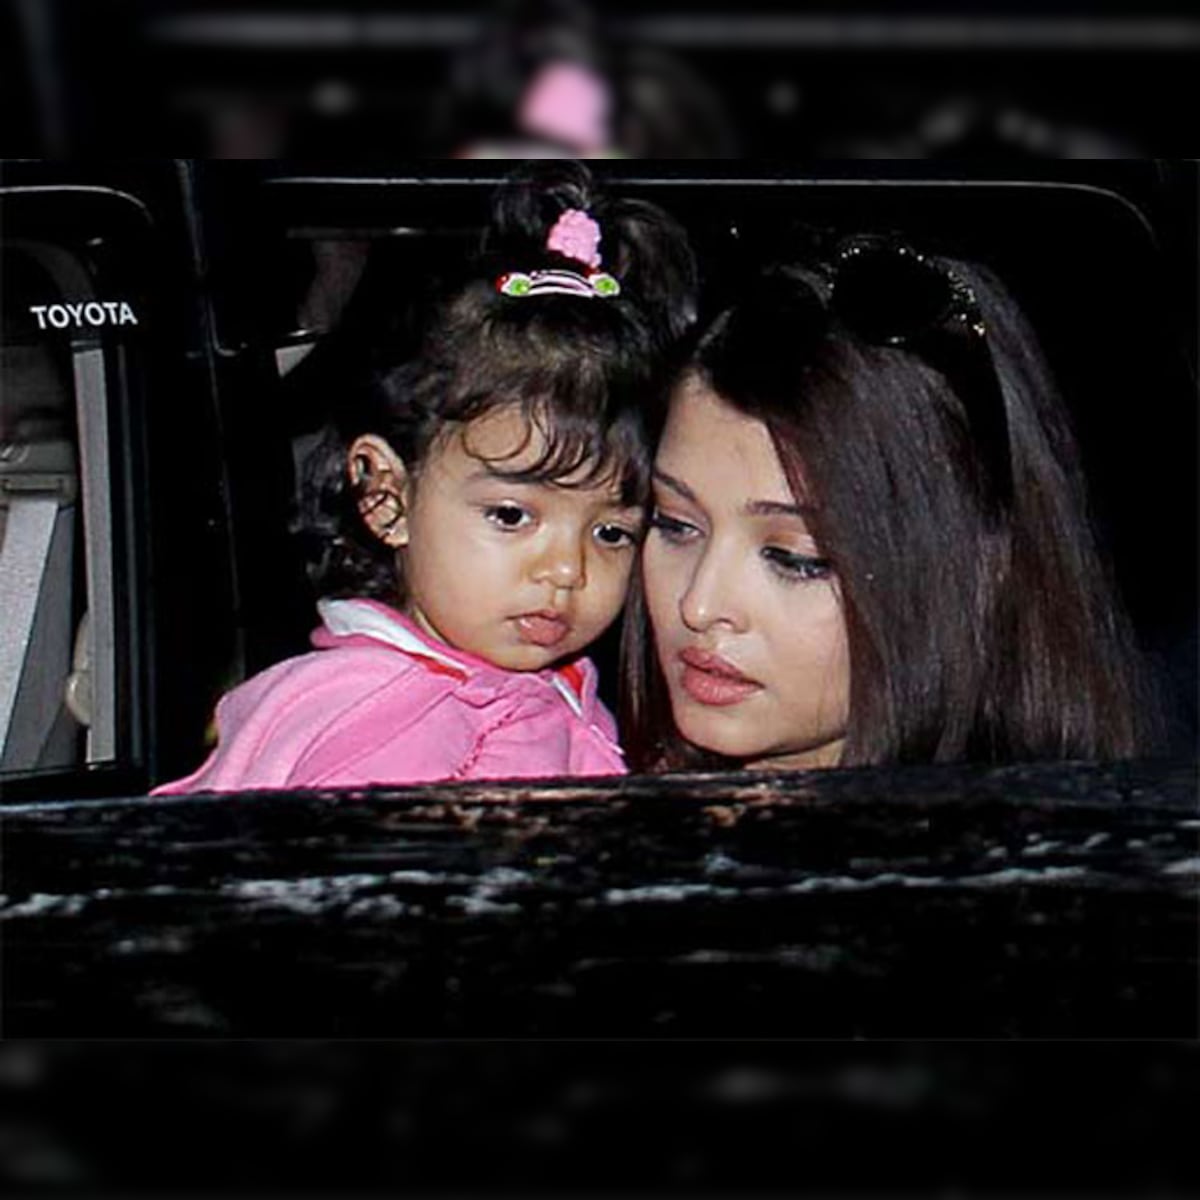 Adira To radhya 36 Most Interesting Celebrity Baby Names And Their Meanings